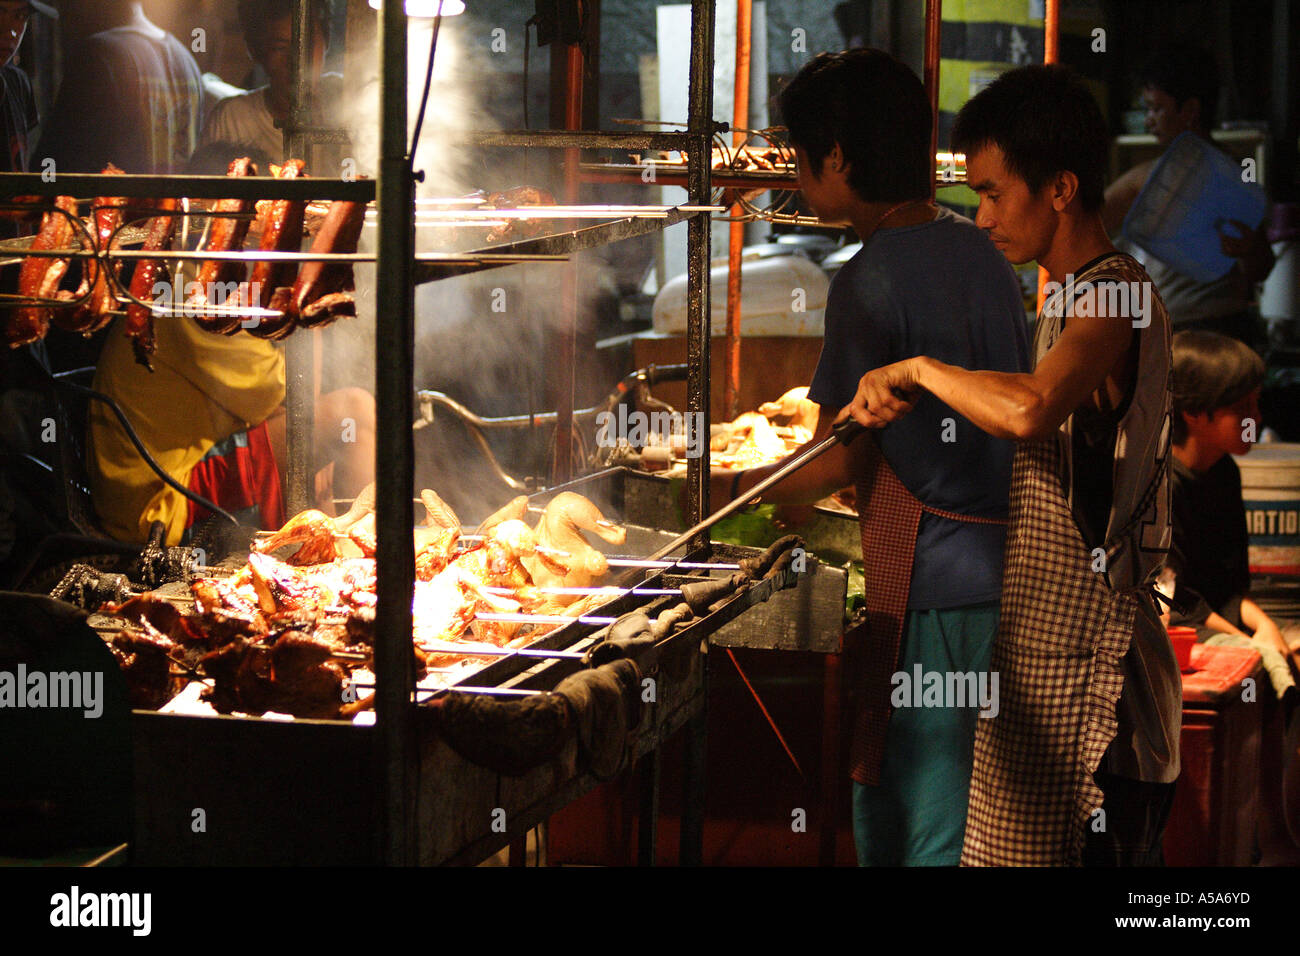 An outdoor BBQ grill selling delicious barbaque chicken, beef and pork, Fields Avenue, Angeles City, Philippine Islands Stock Photo